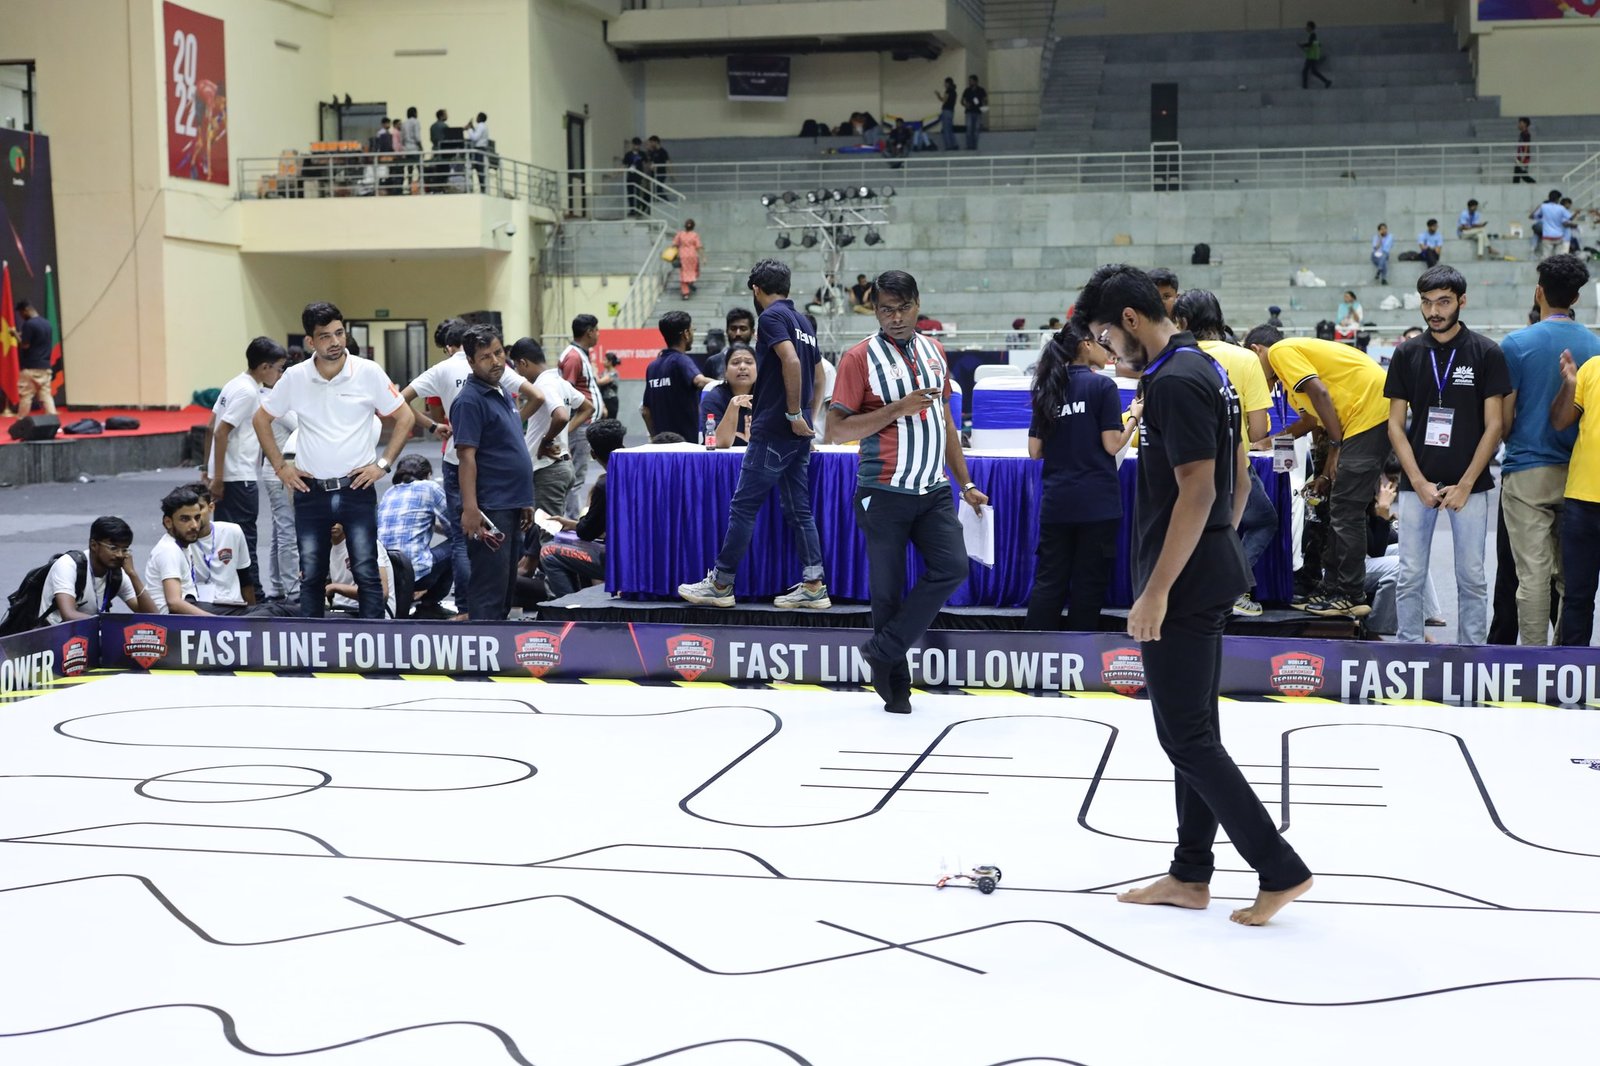 Eastern Bot Alpha Crowned Fastest Line Follower in TechnoXian WRC 7.0 Competition